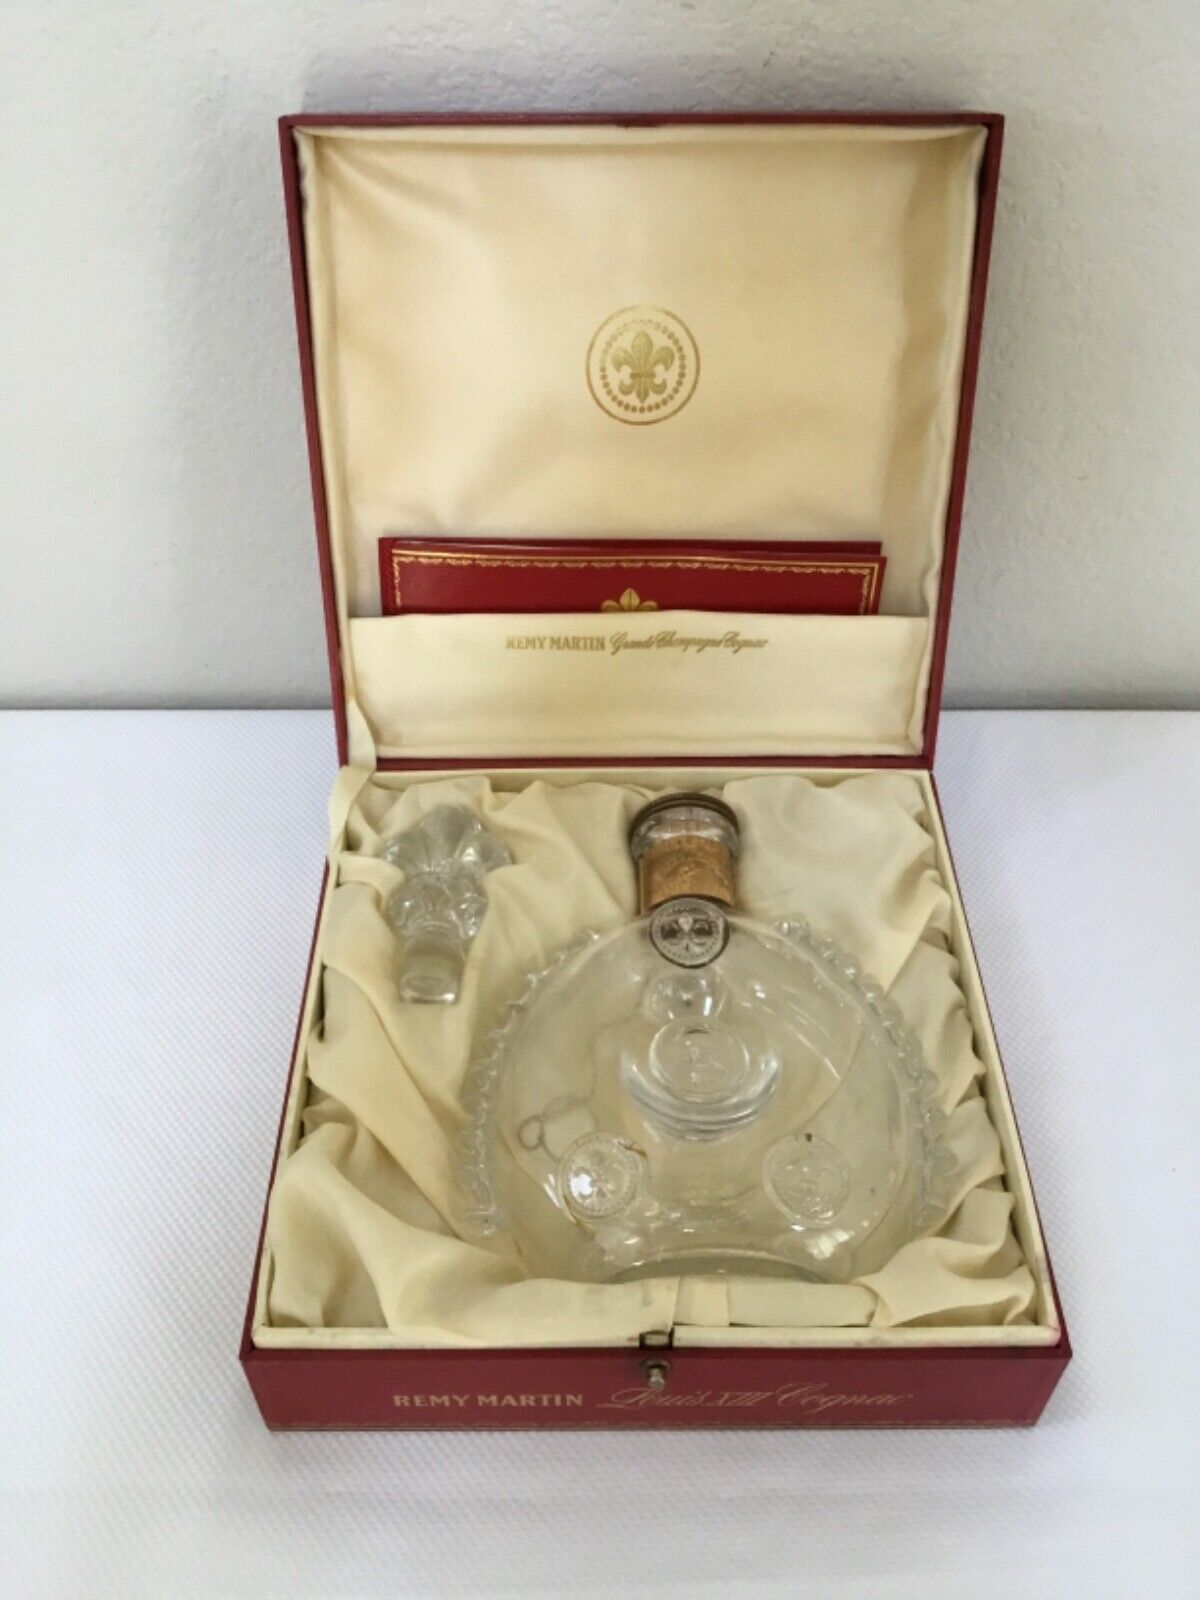 AUTHENTIC REMY MARTIN LOUIS XIII COGNAC BACCARAT CRYSTAL DECANTER EMPTY WITH BOX